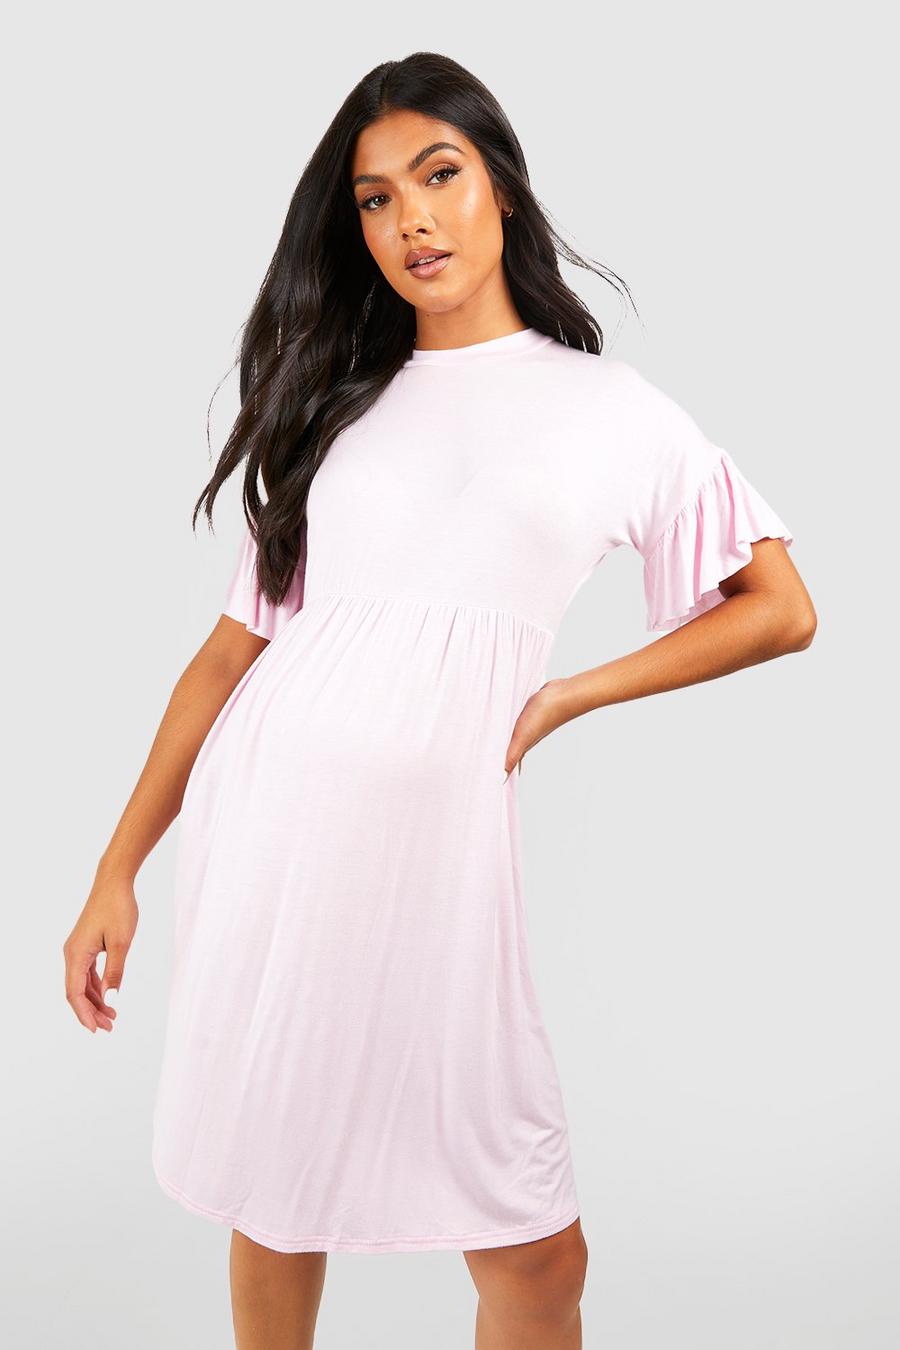 Maternity Sale, Cheap Maternity Clothes